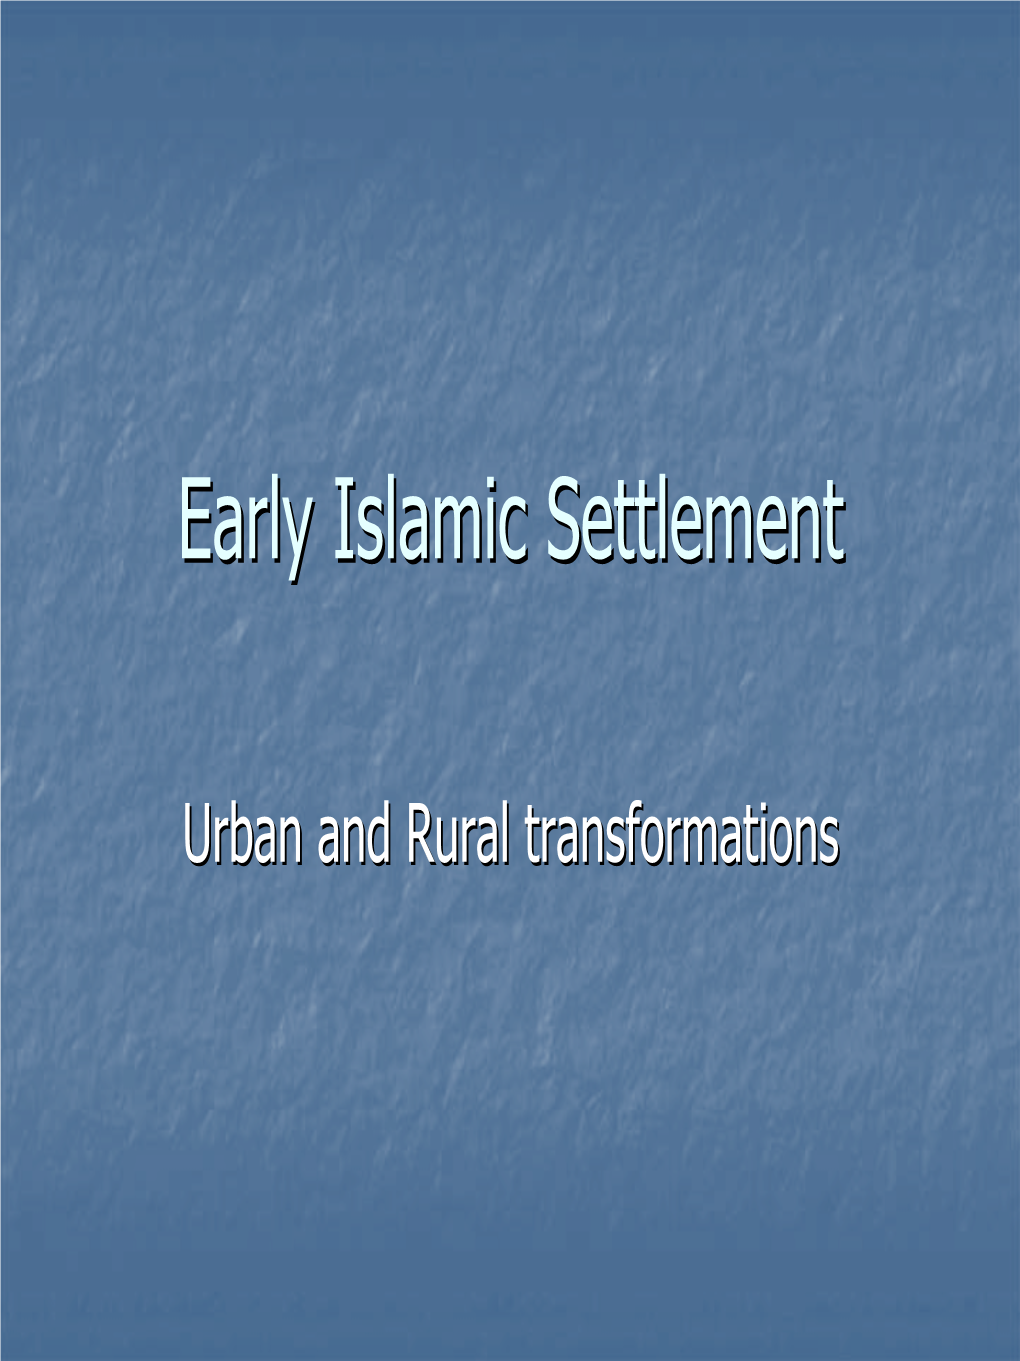 Tropes of Early Islamic Settlement